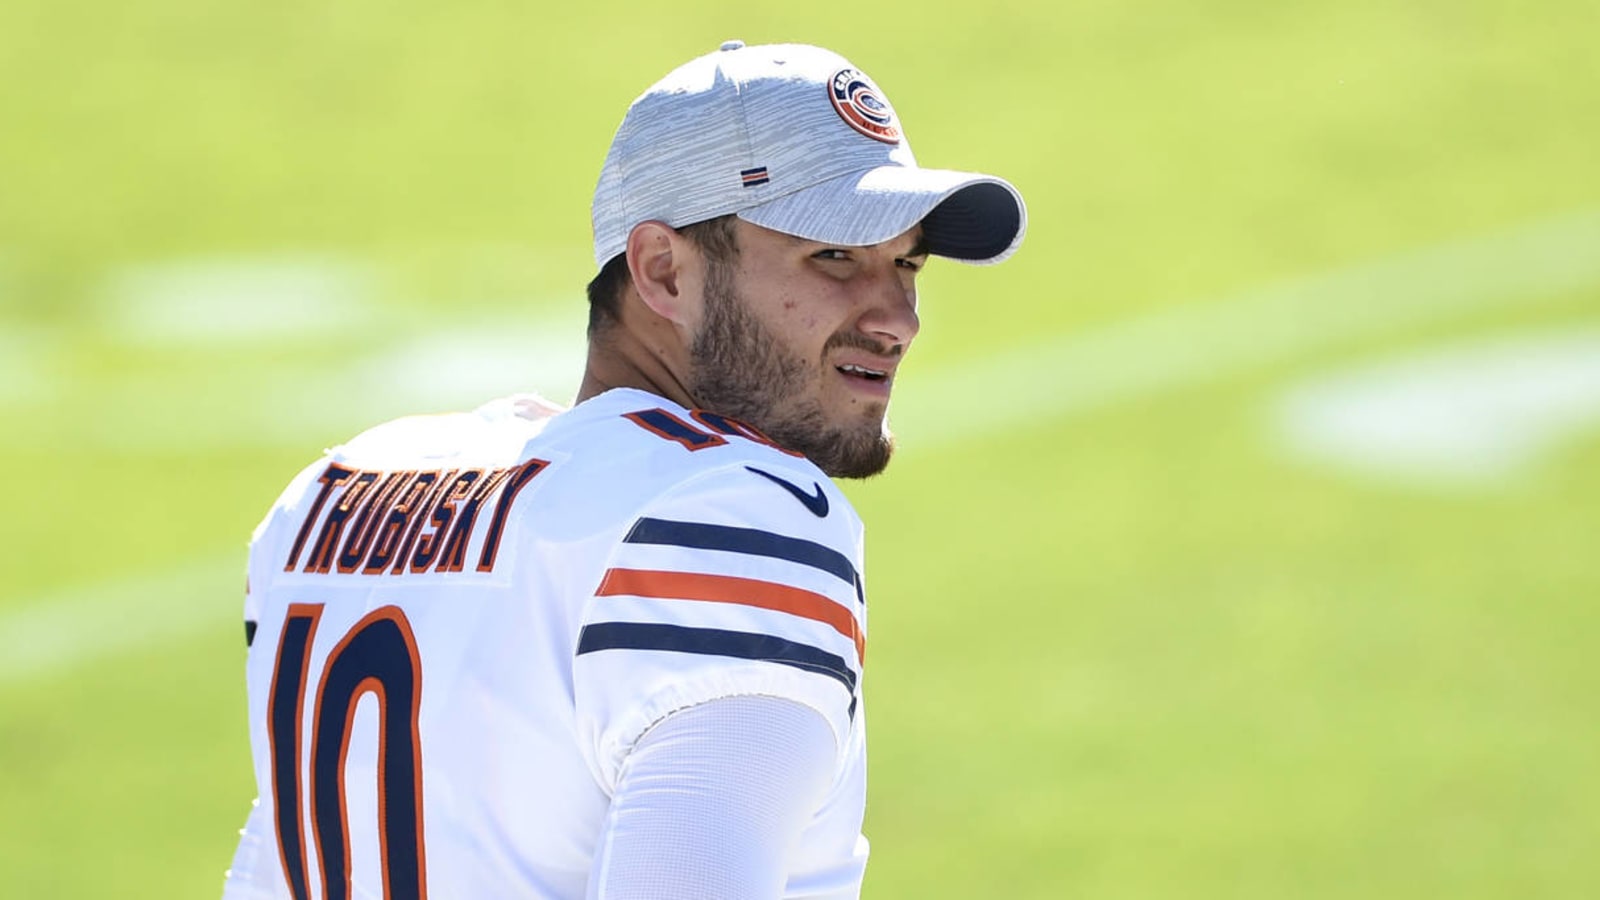 Mitchell Trubisky gets engaged to girlfriend Hillary Gallagher